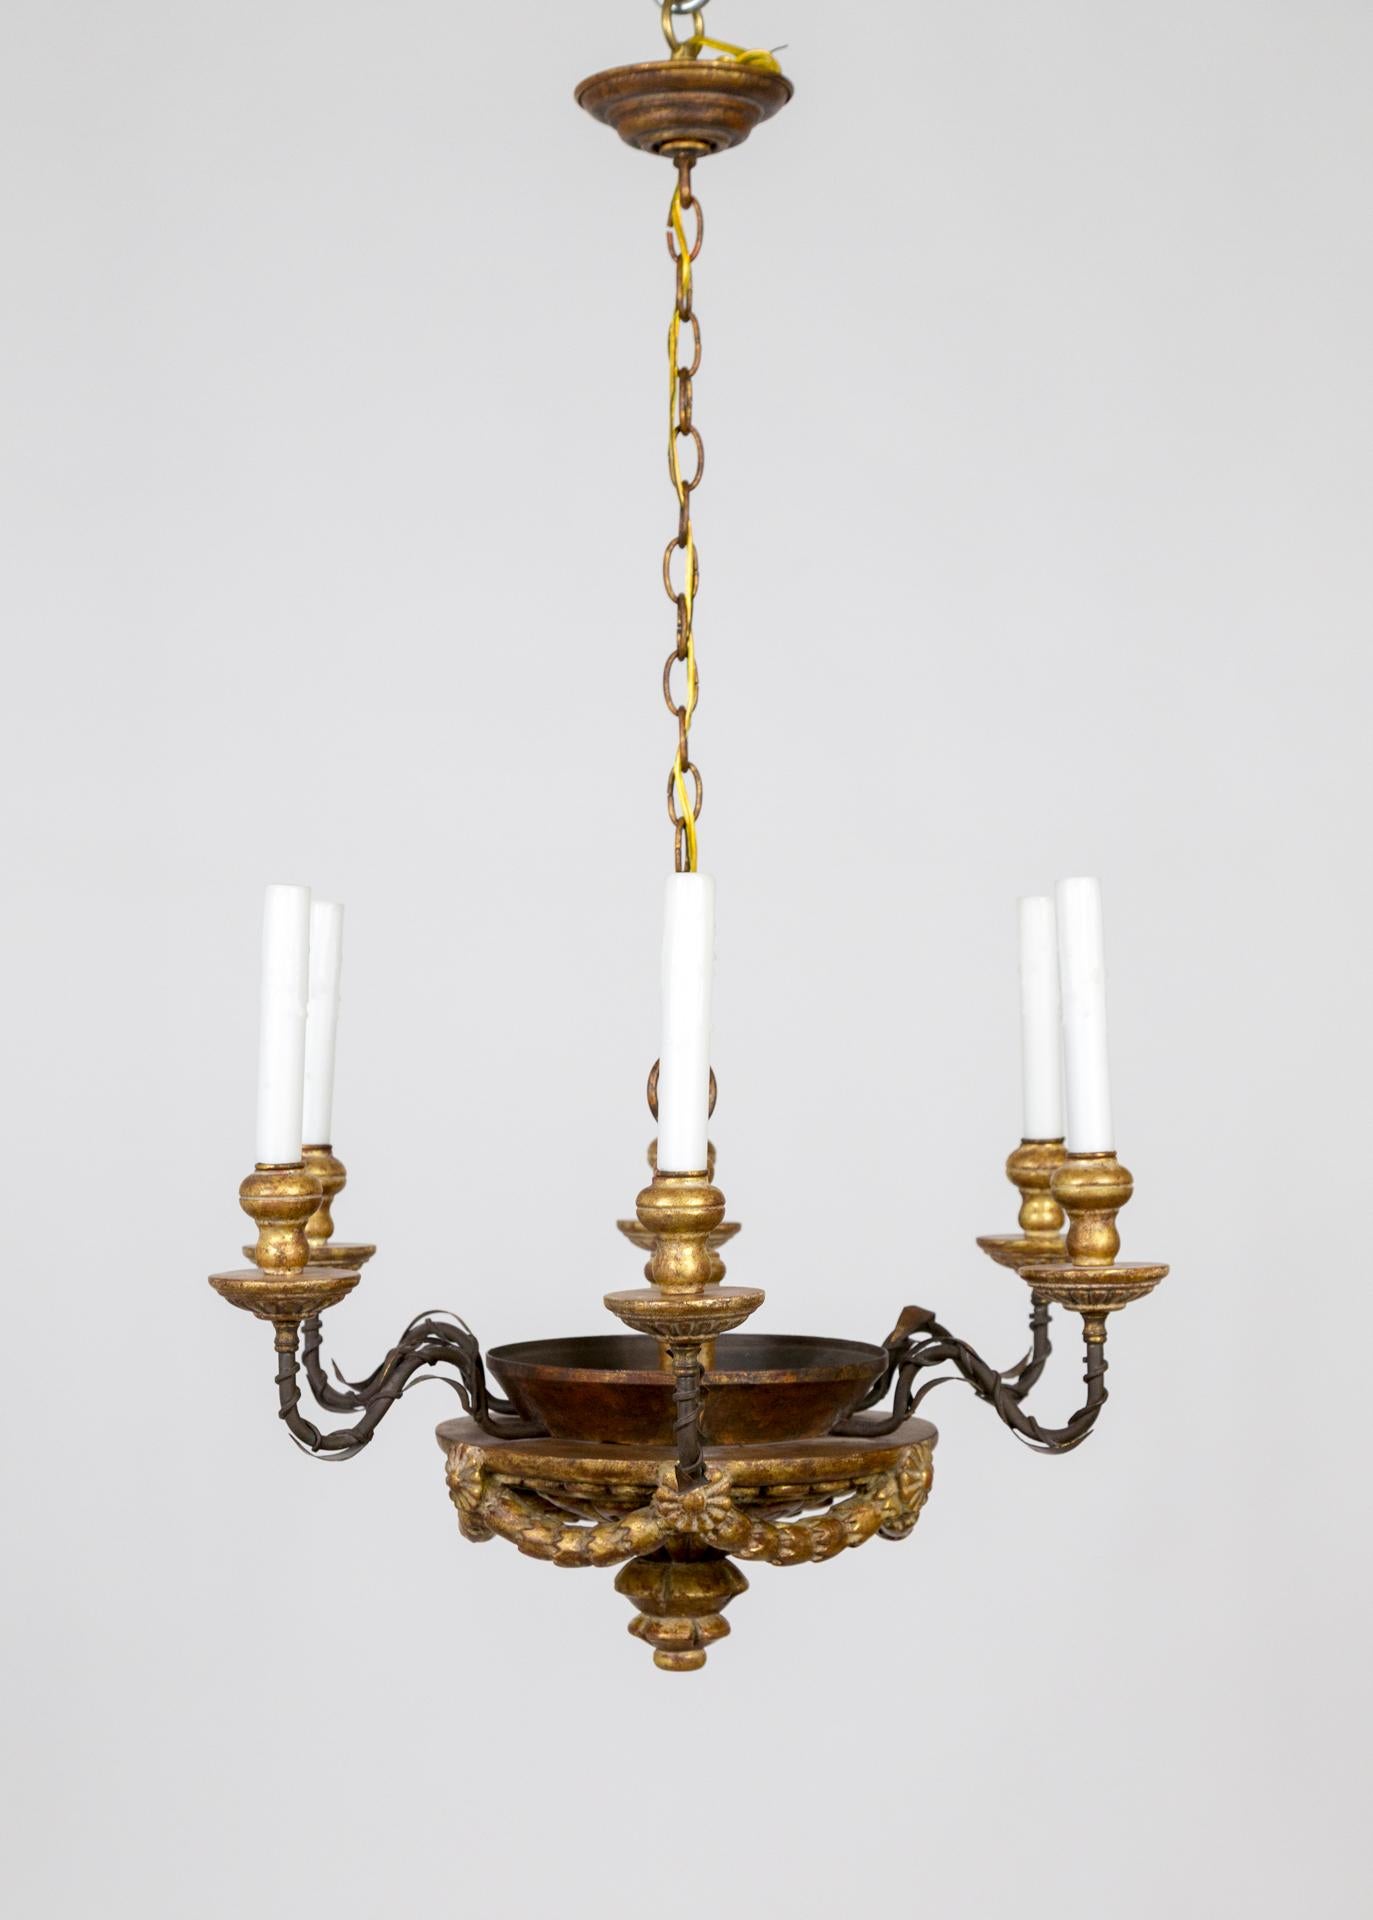 Iron Neoclassical Gilt Wood Firenze Chandelier by Dennis & Leen  For Sale